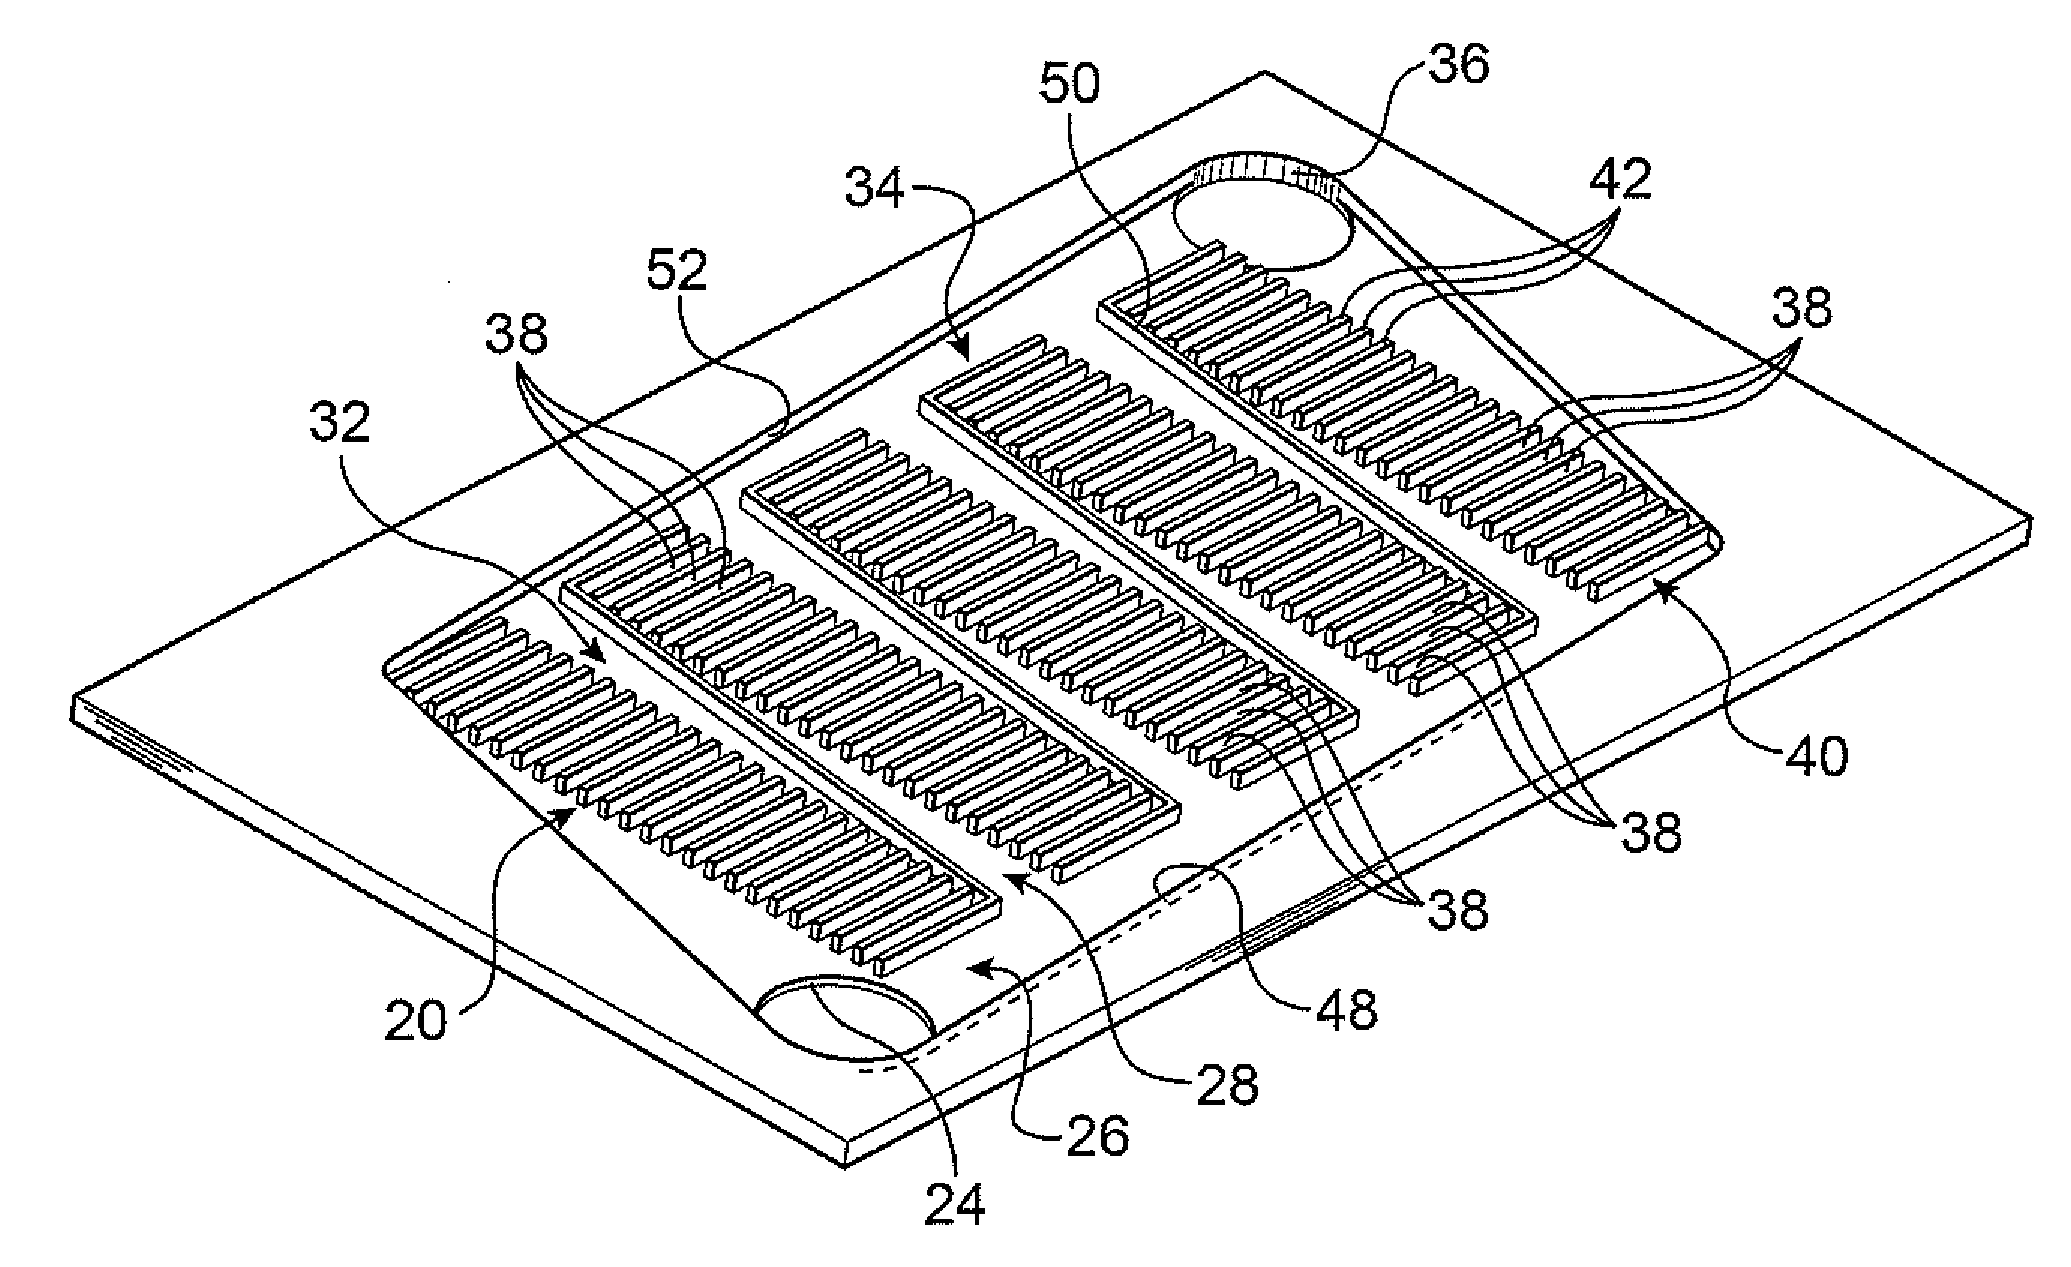 Heat Exchanger System Comprising Fluid Circulation Zones Which are Selectively Coated with a Chemical Reaction Catalyst